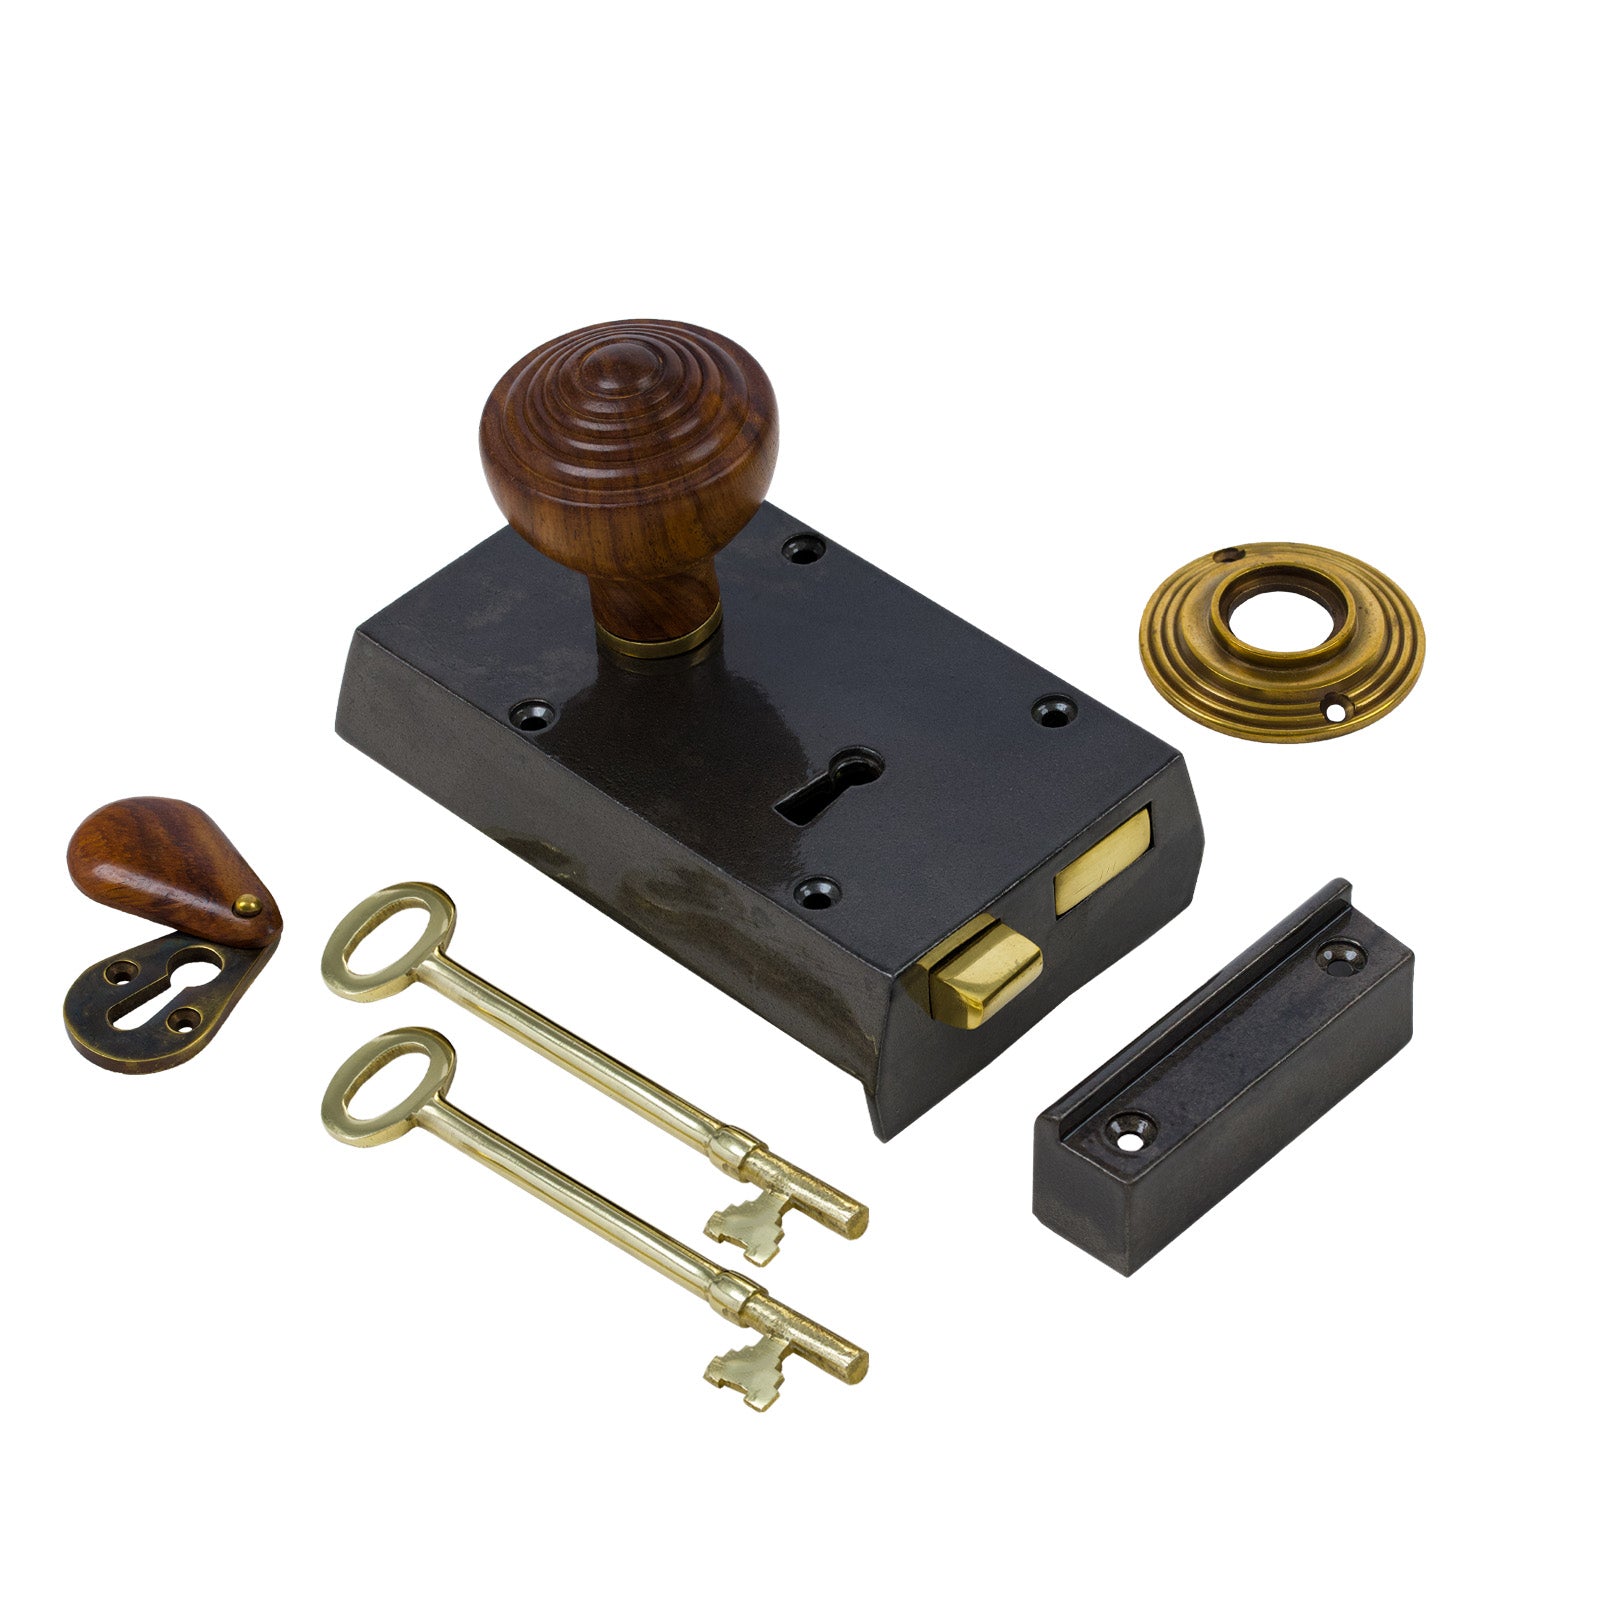 SHOW Left Handed Small Cast Iron Rim Lock With Ringed Door Knob Set - Rosewood